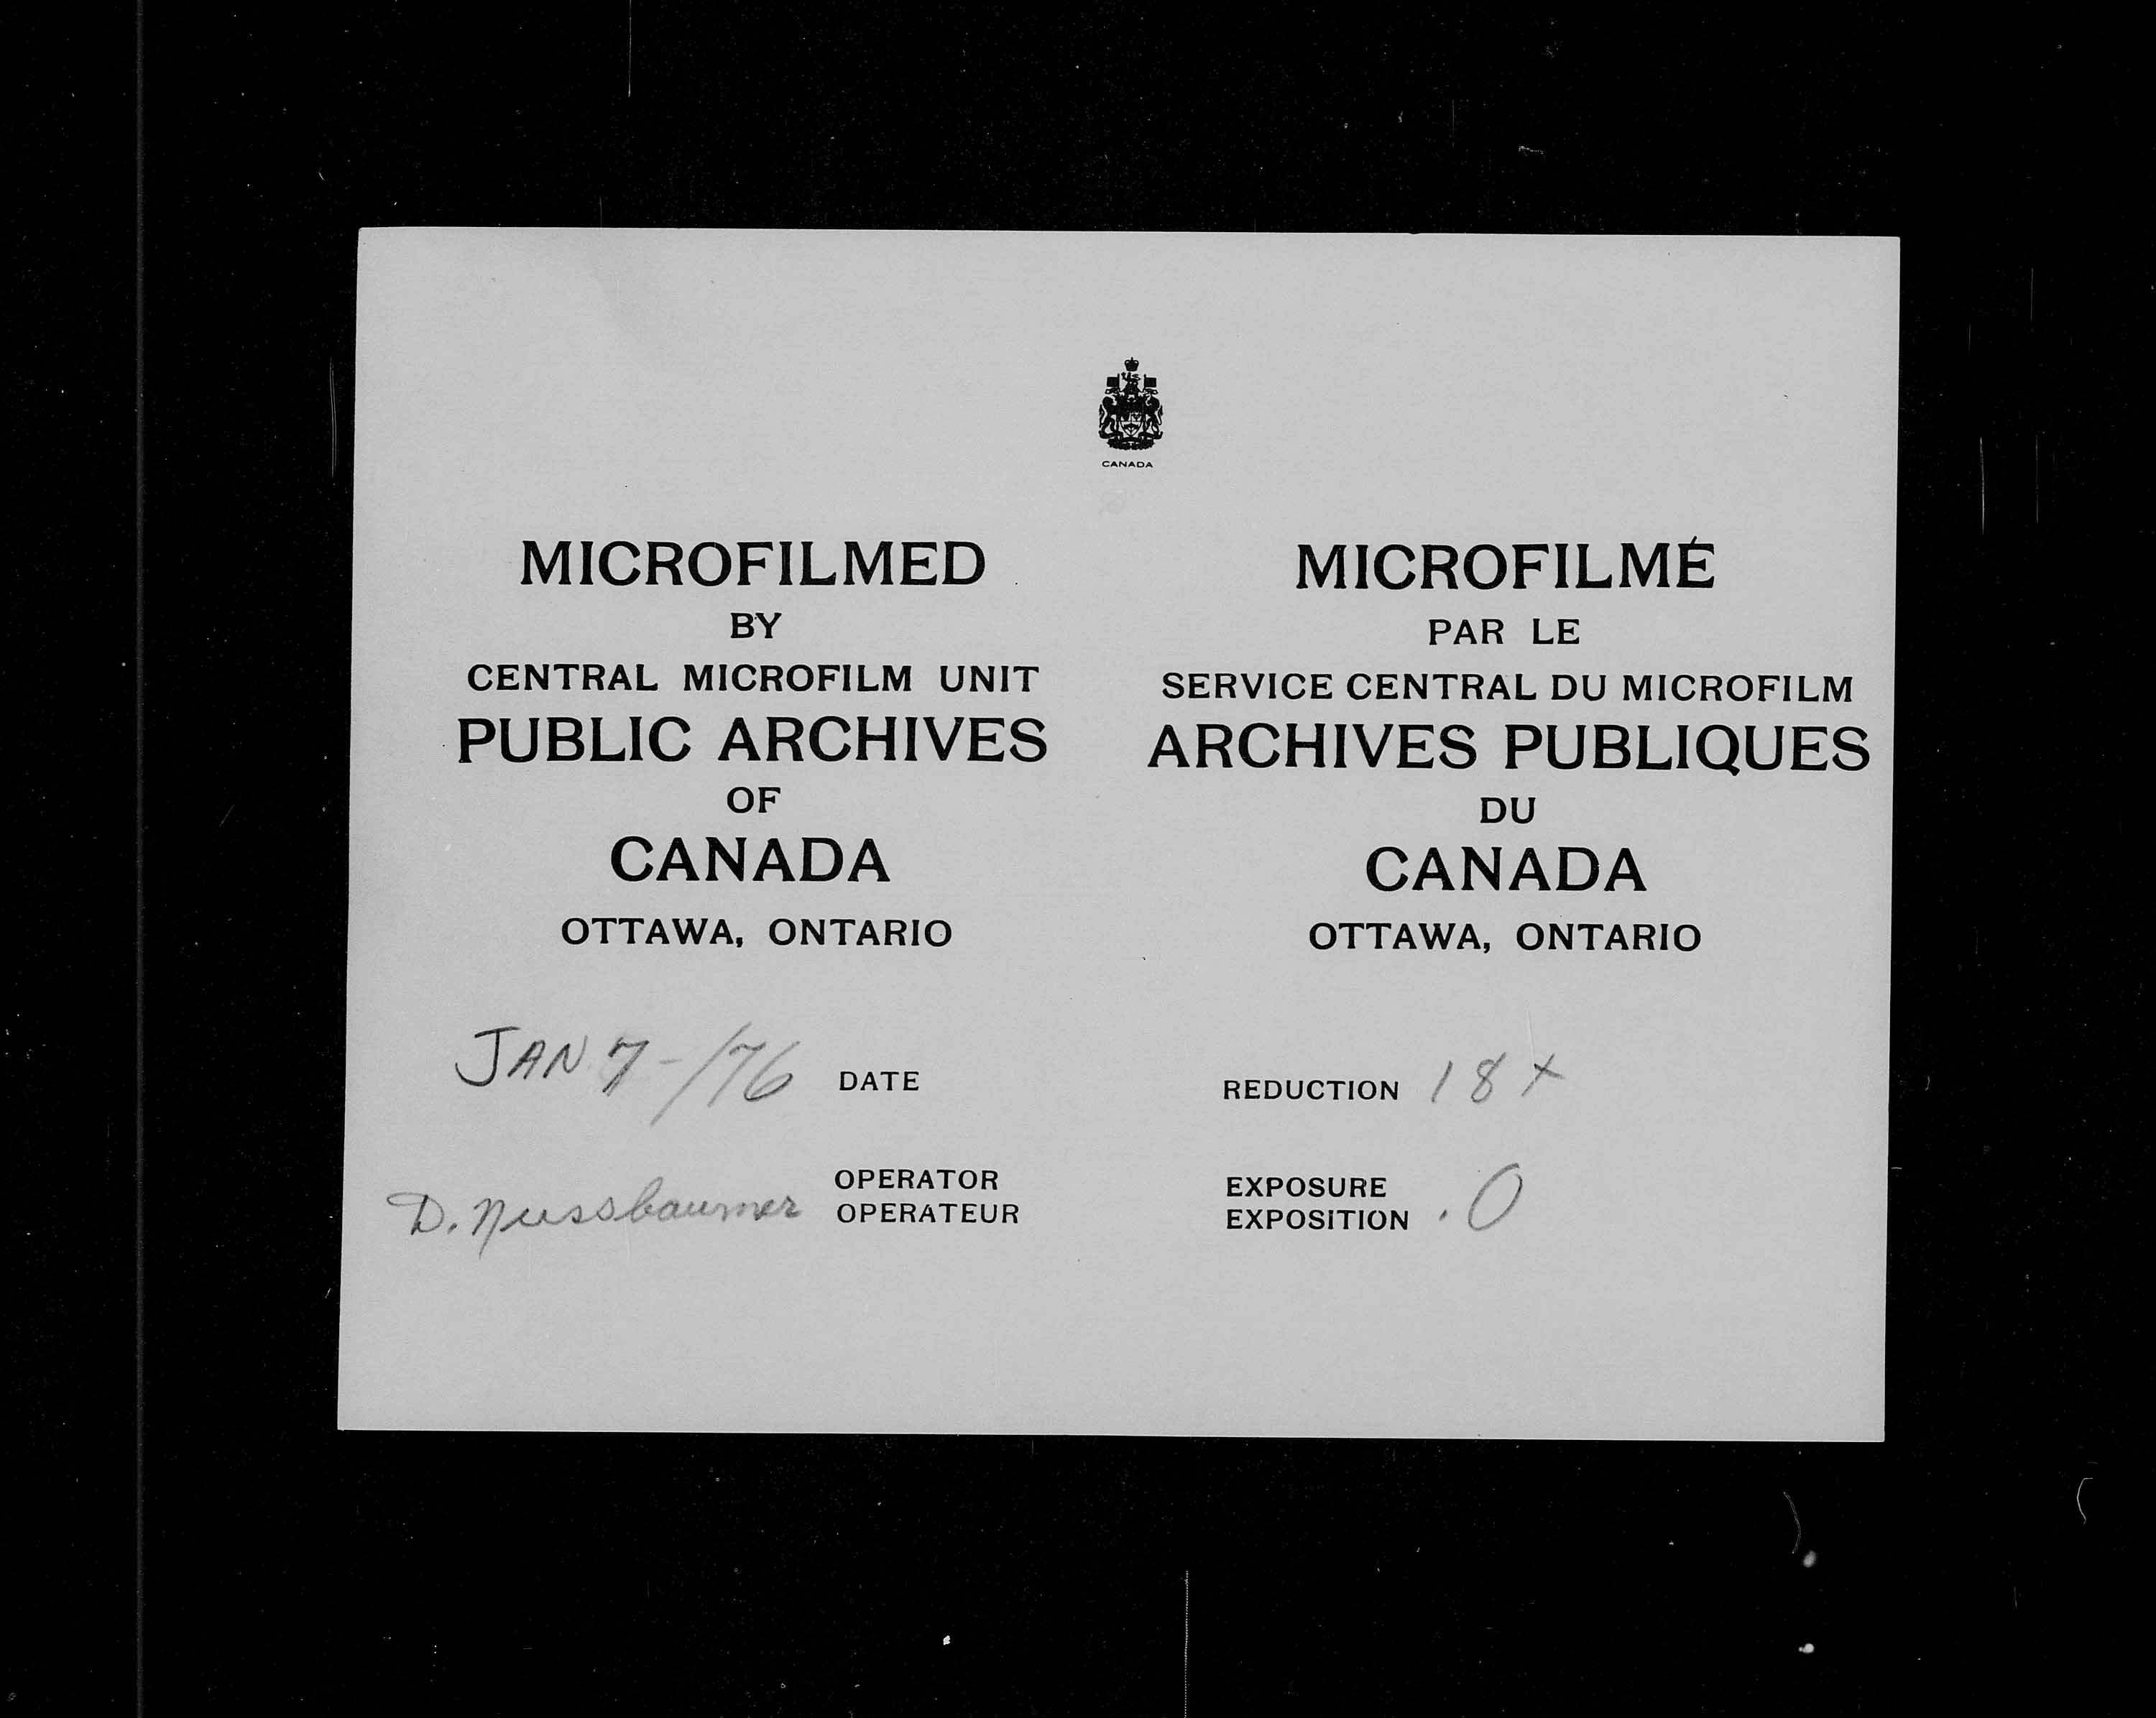 Title: Census of Canada, 1871 - Mikan Number: 142105 - Microform: c-10006